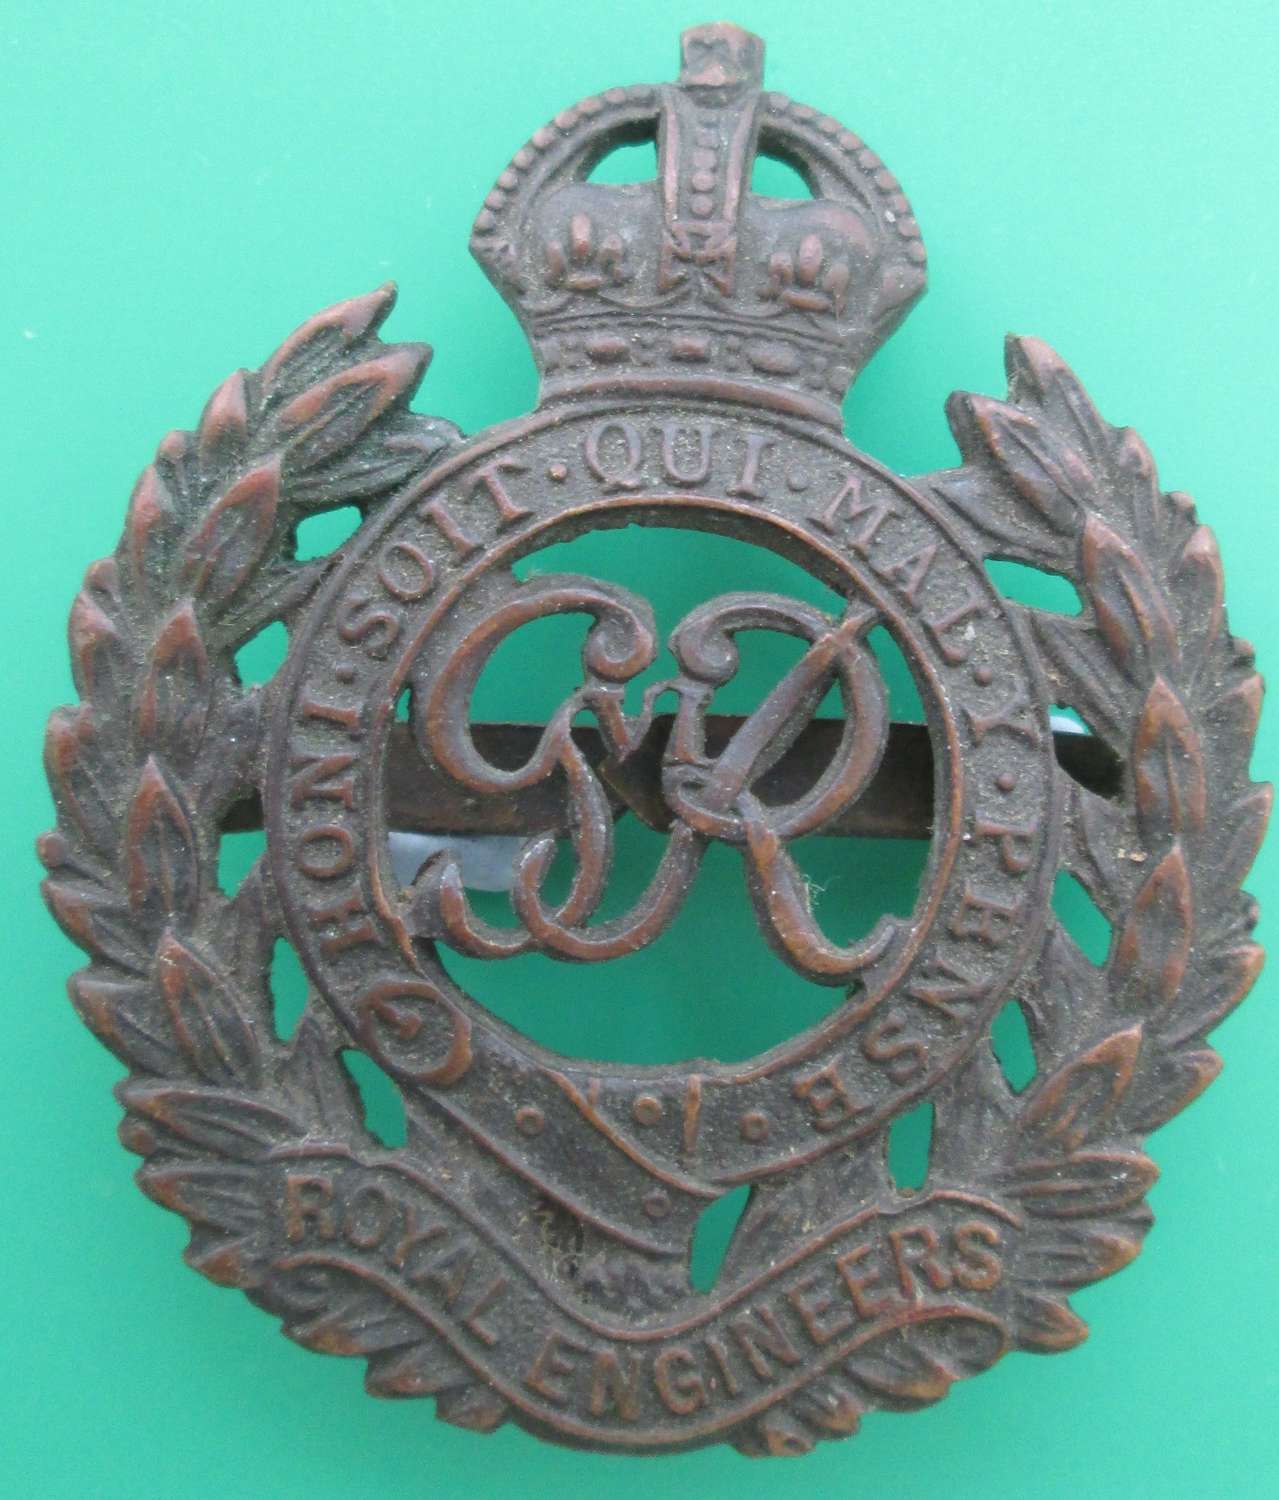 A BRONZE OFFICER'S ROYAL ENGINEERS BADGE POST 1937 EXAMPLE